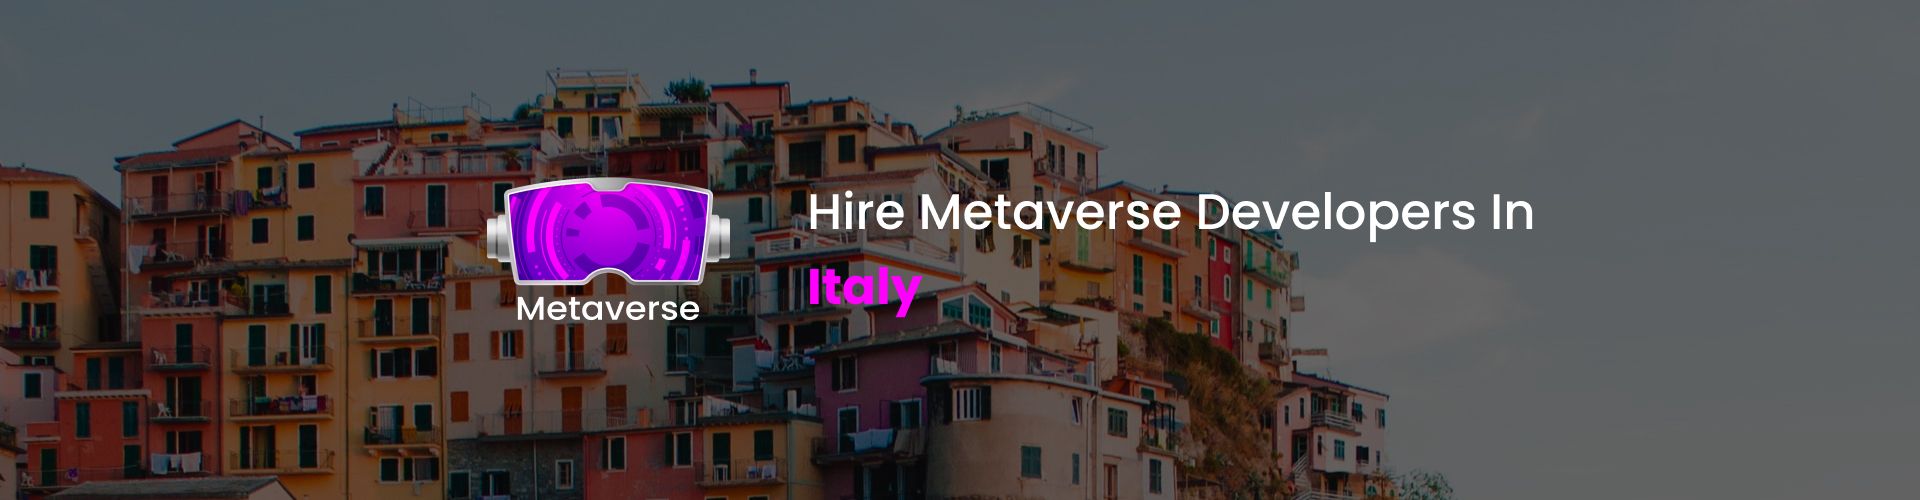 metaverse developers in italy